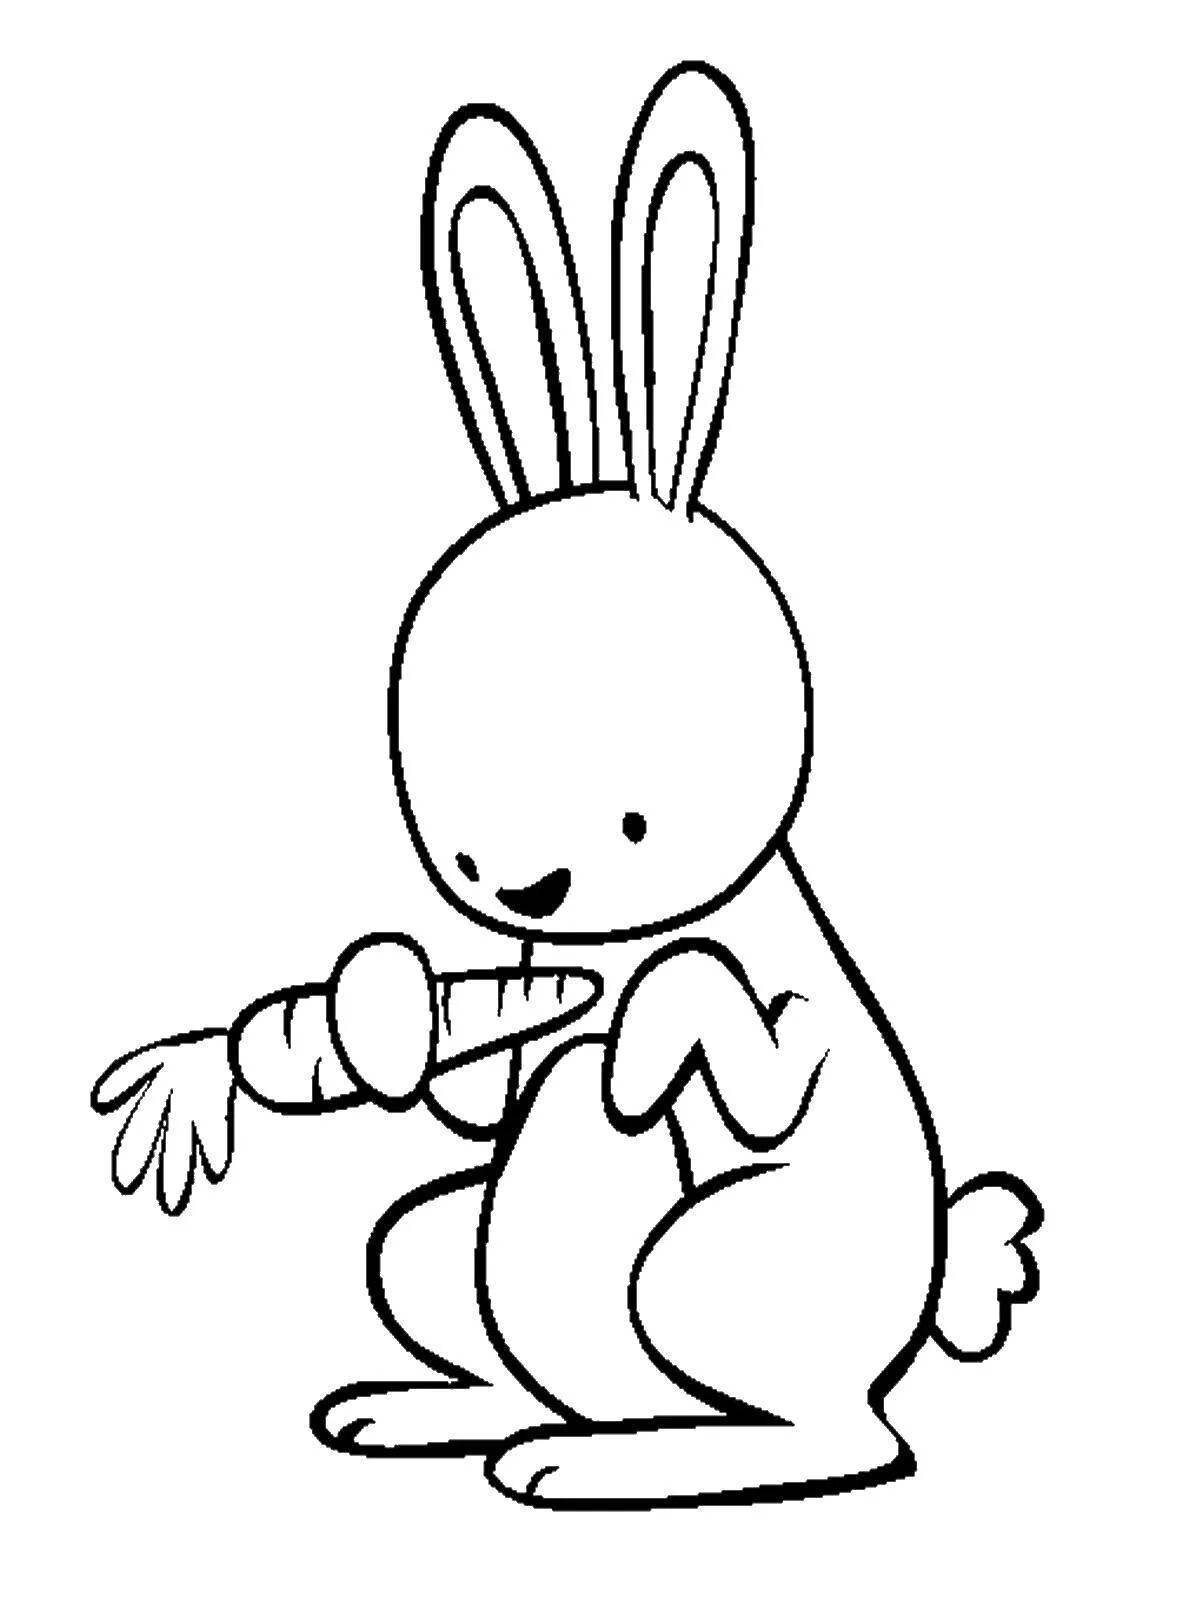 Cute and cozy rabbit coloring book